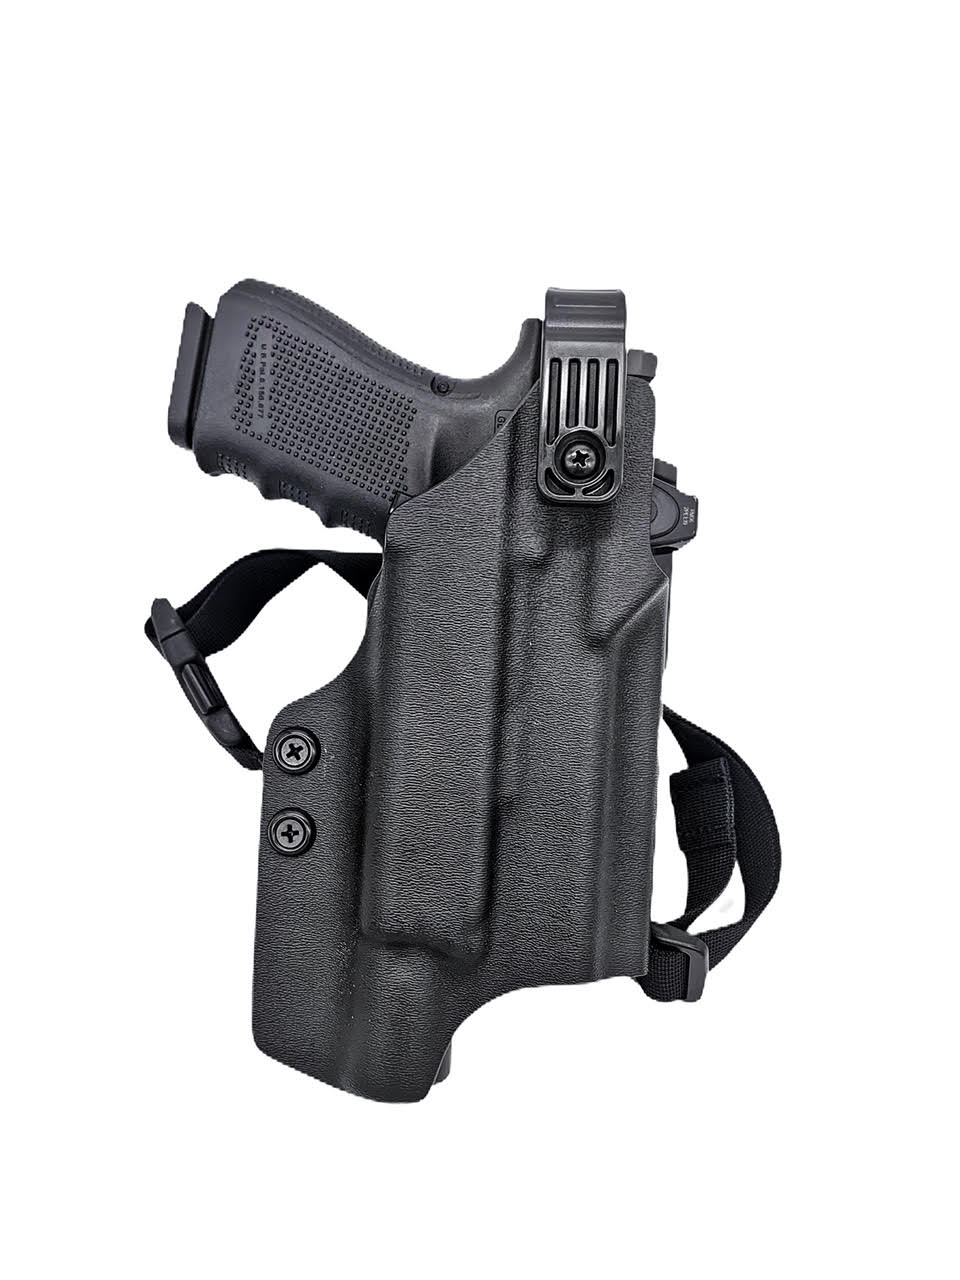 Retention Holster for Open Carry